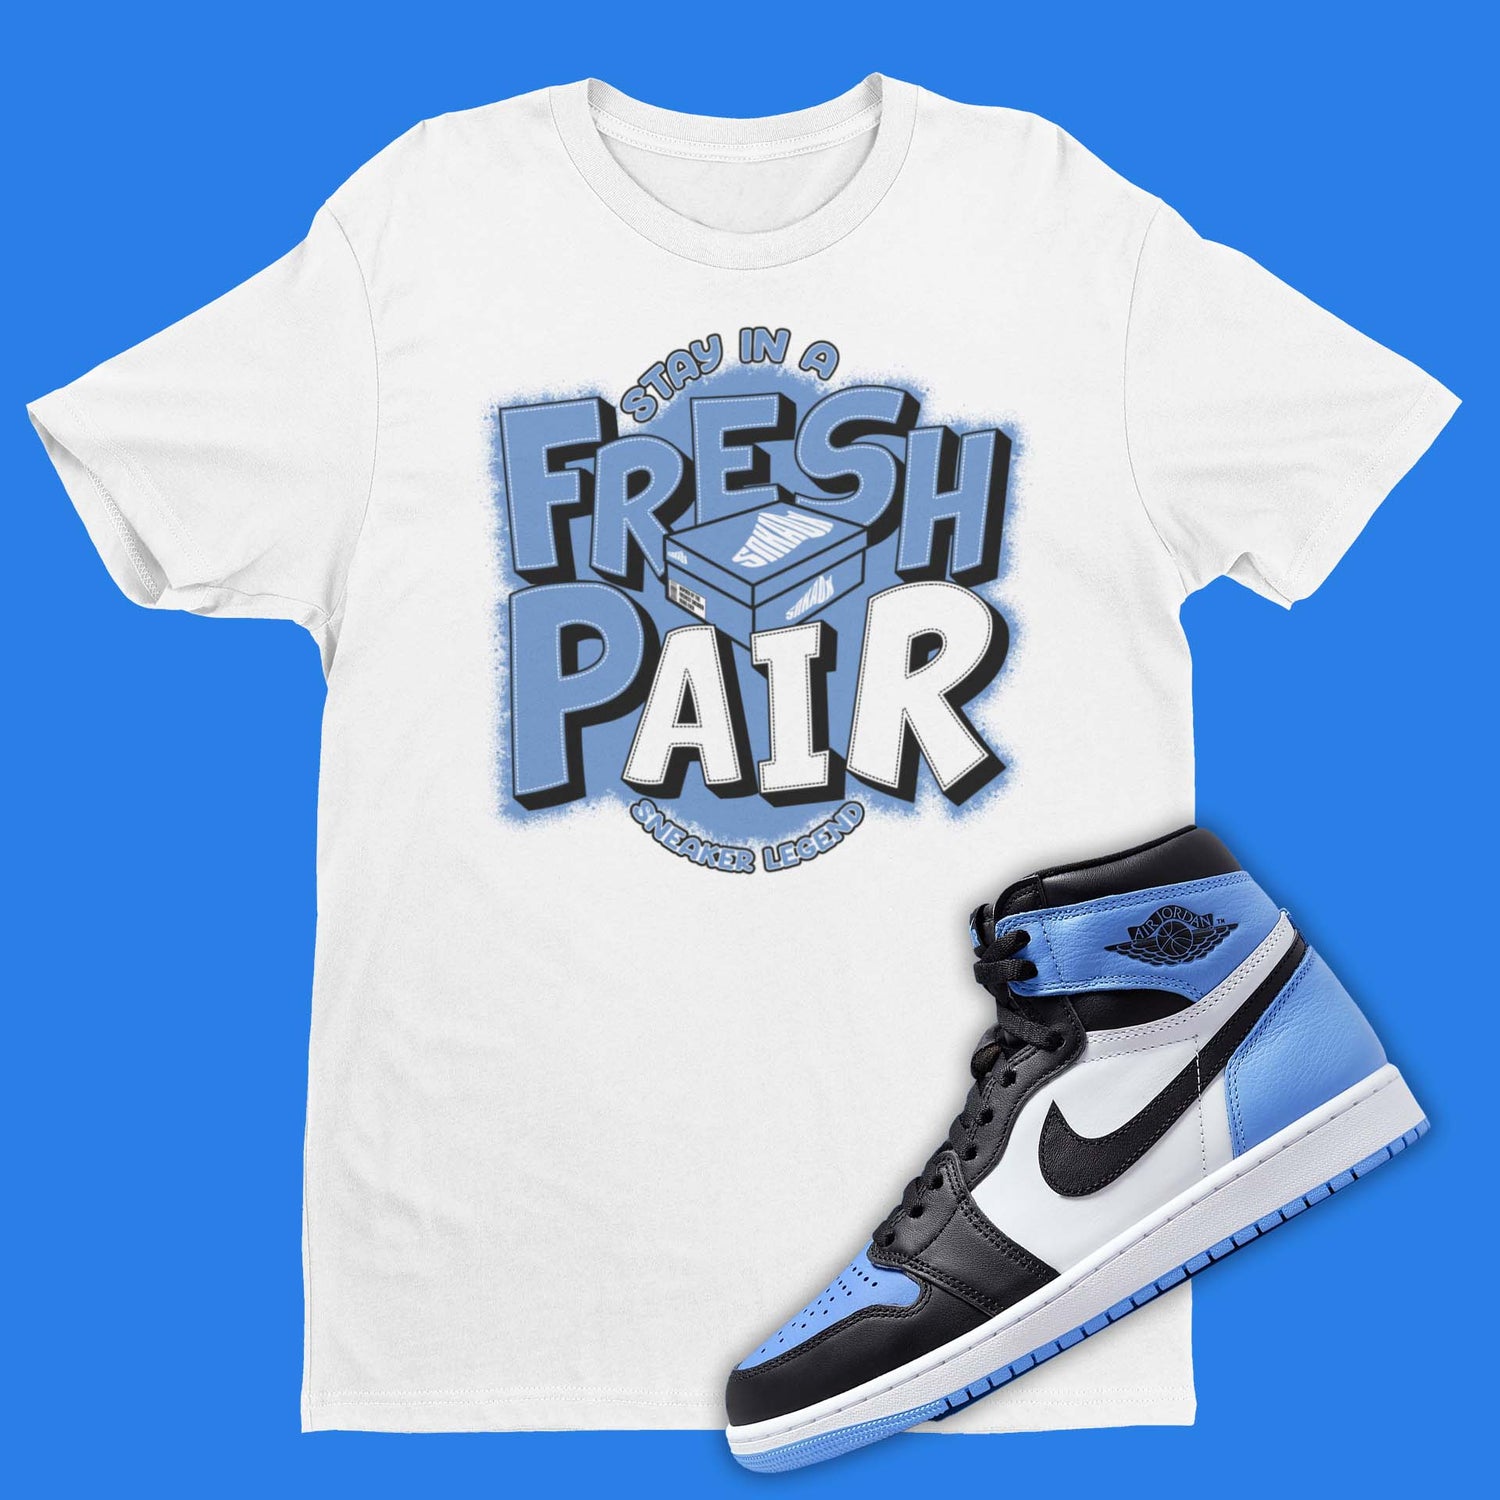 Air Jordan 1 Retro High OG UNC Toe Matching T-Shirt from SNKADX with shoe box on the front and 'Stay in a Fresh Pair'